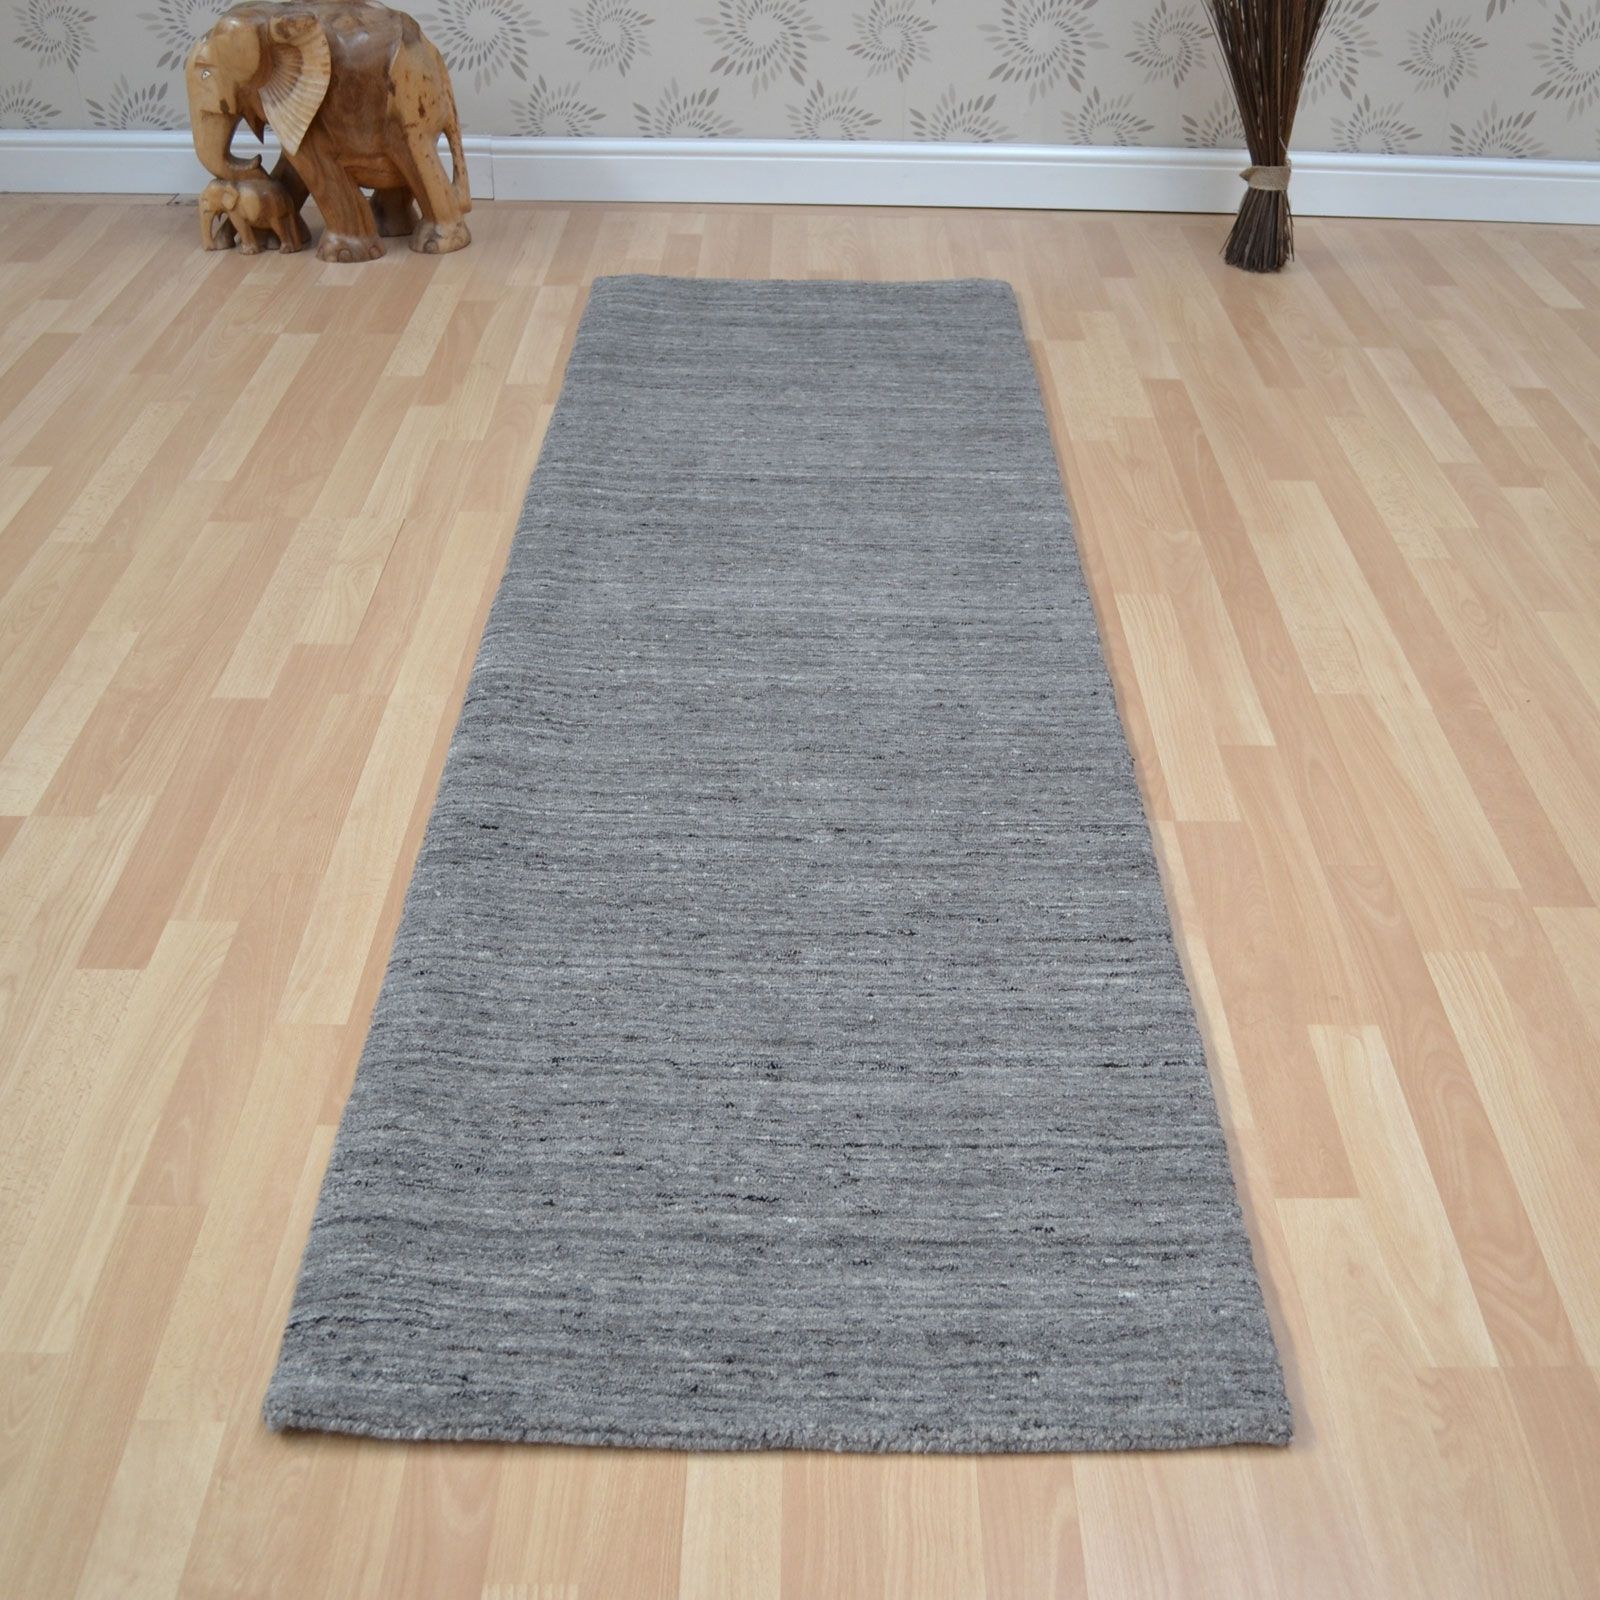 Hallway Runners Find The Best Hall Rug For Your Home Regarding Hall Runners Green (View 5 of 20)